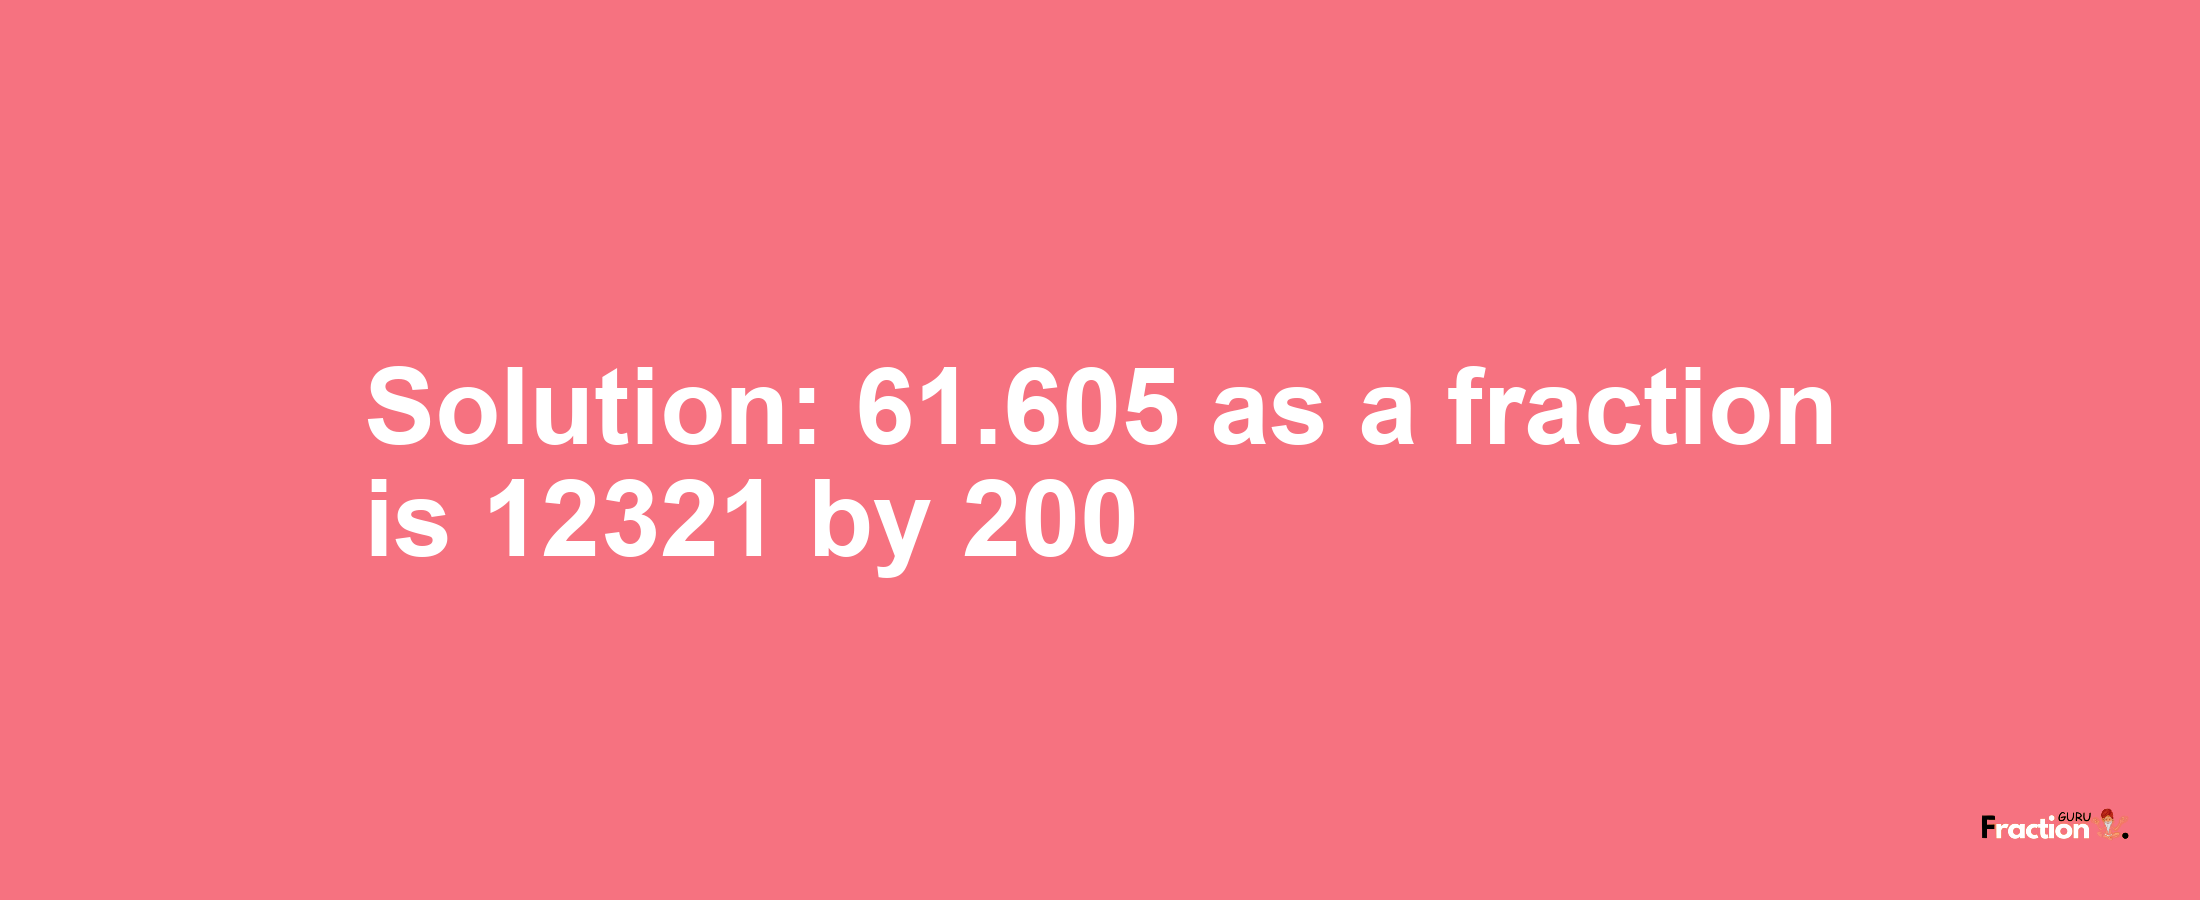 Solution:61.605 as a fraction is 12321/200